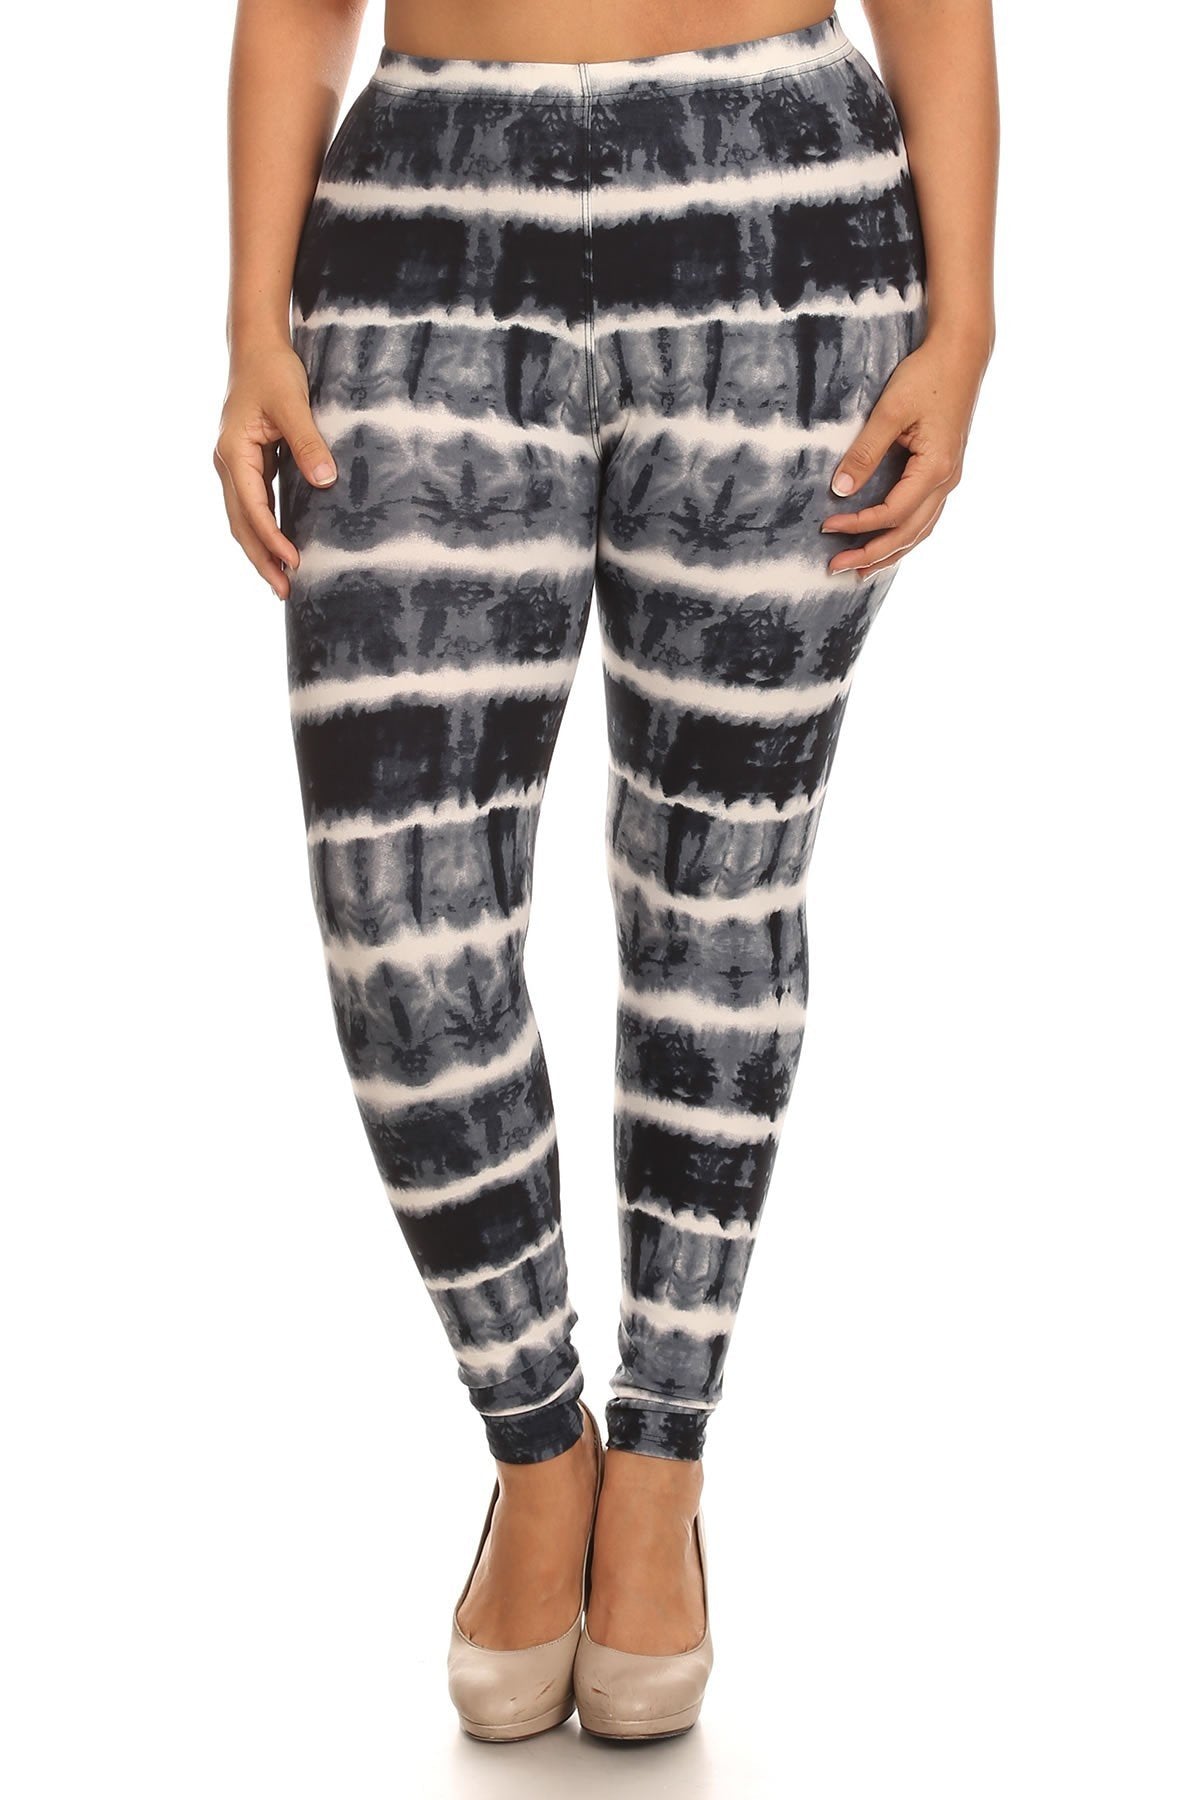 Tie Dye Print, Full Length Leggings In a Fitted Style With a Banded High Waist - FabulousFixx